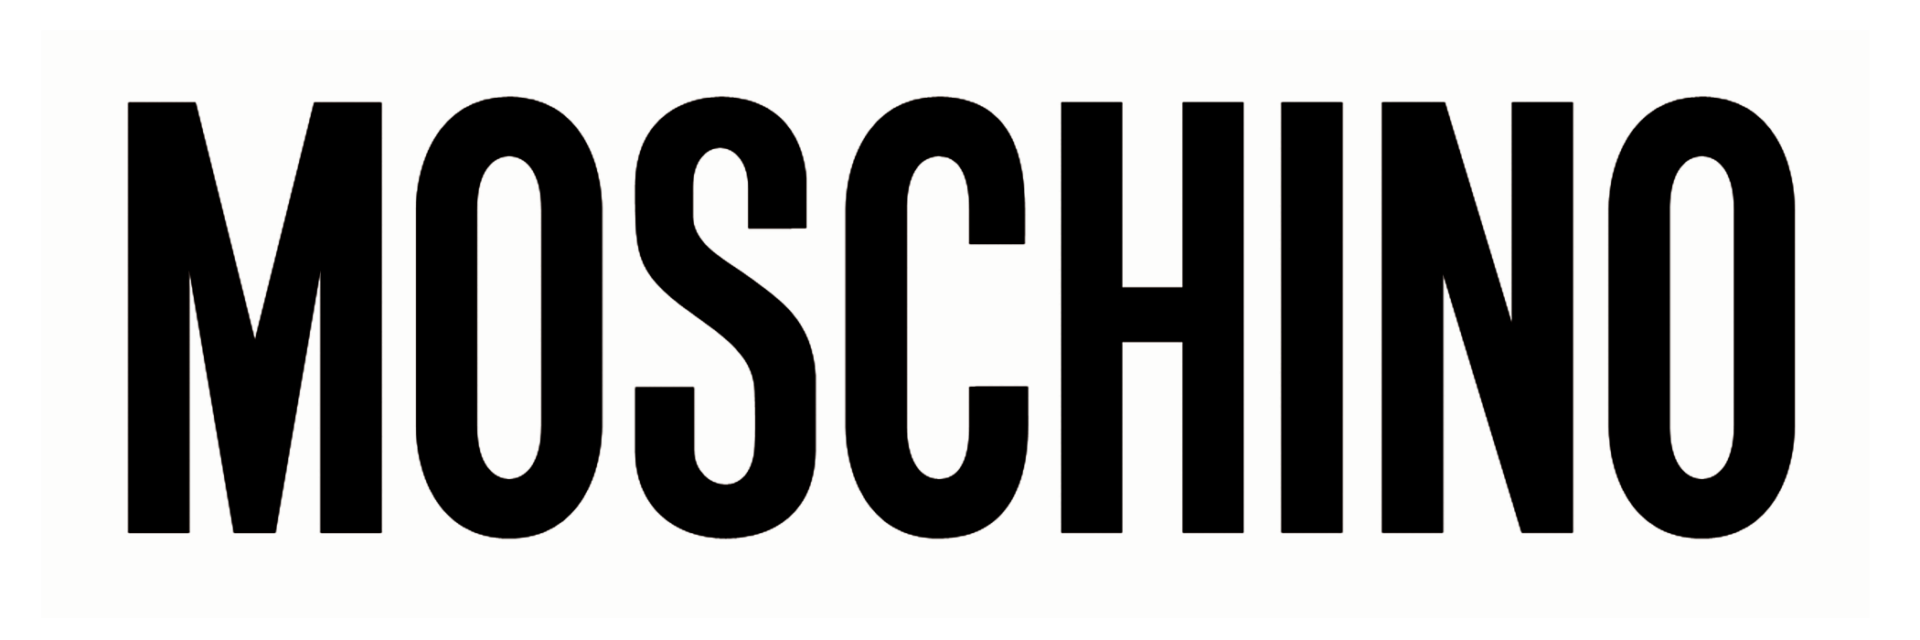 A black and white image of the word scho